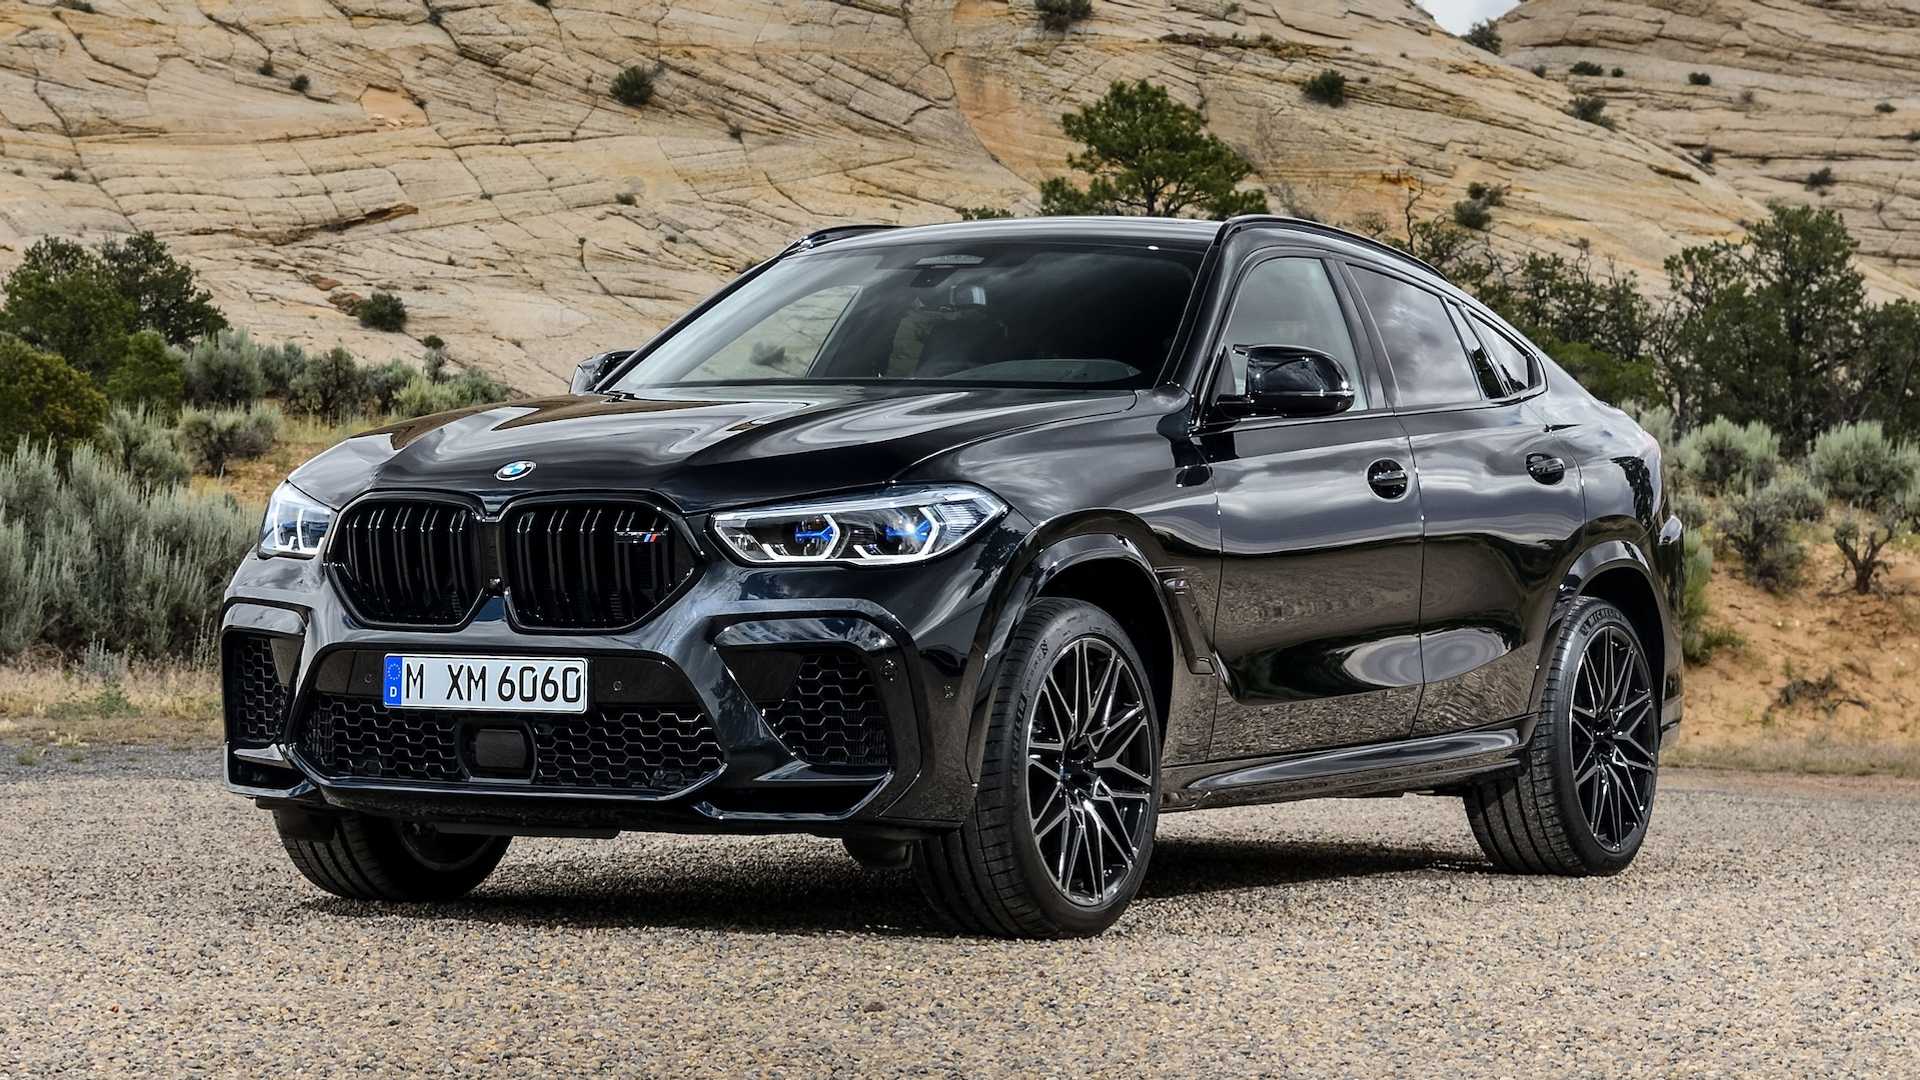 Bmw x6 competition 2018